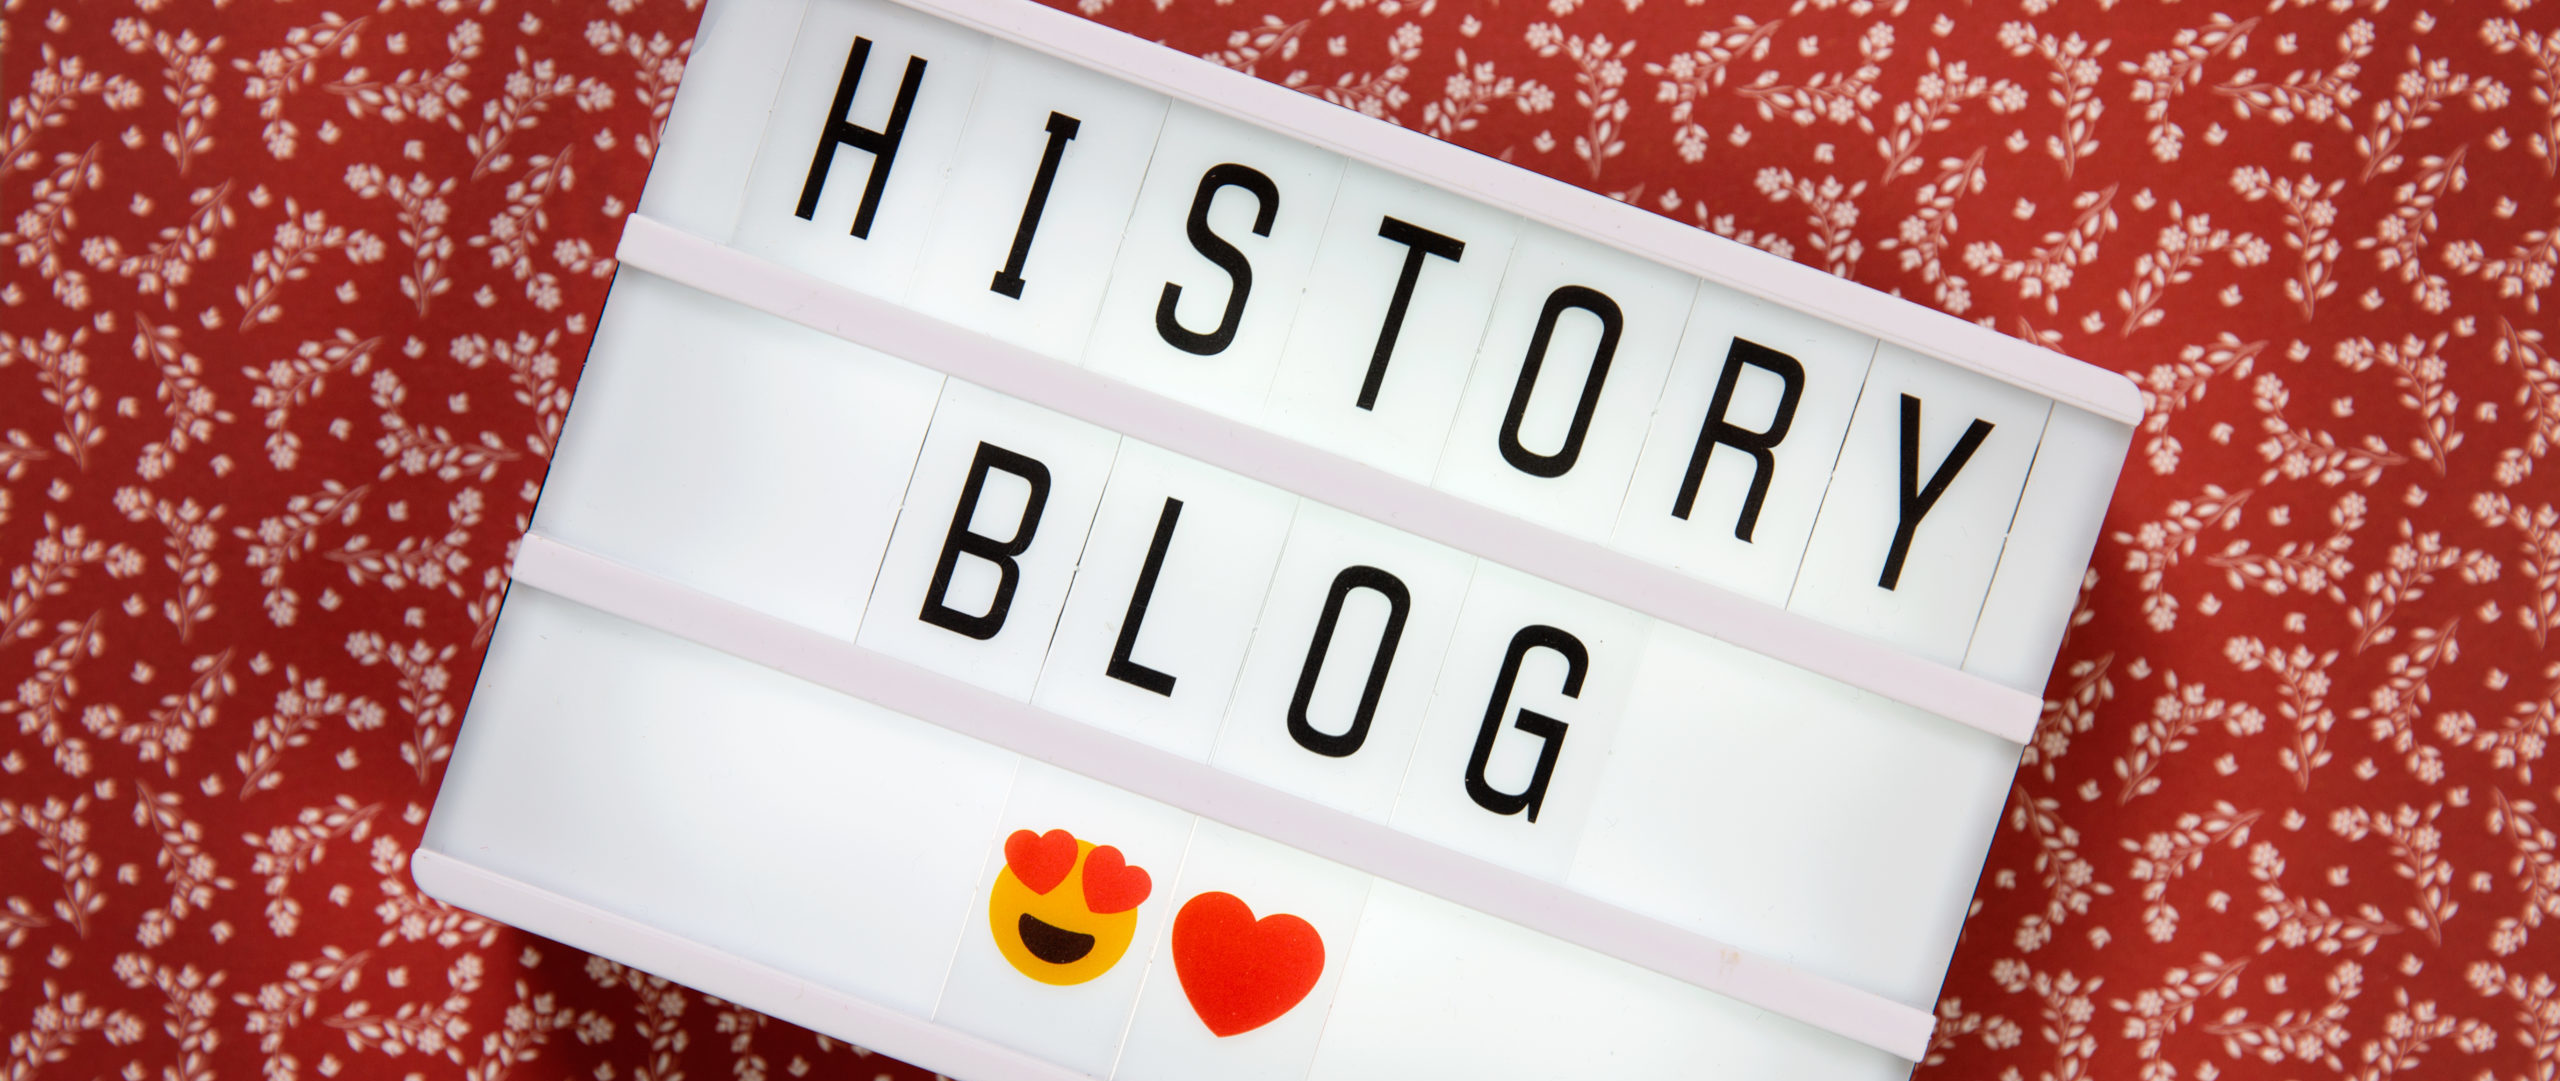 You are currently viewing History Blogging: 35 ideas for blog posts